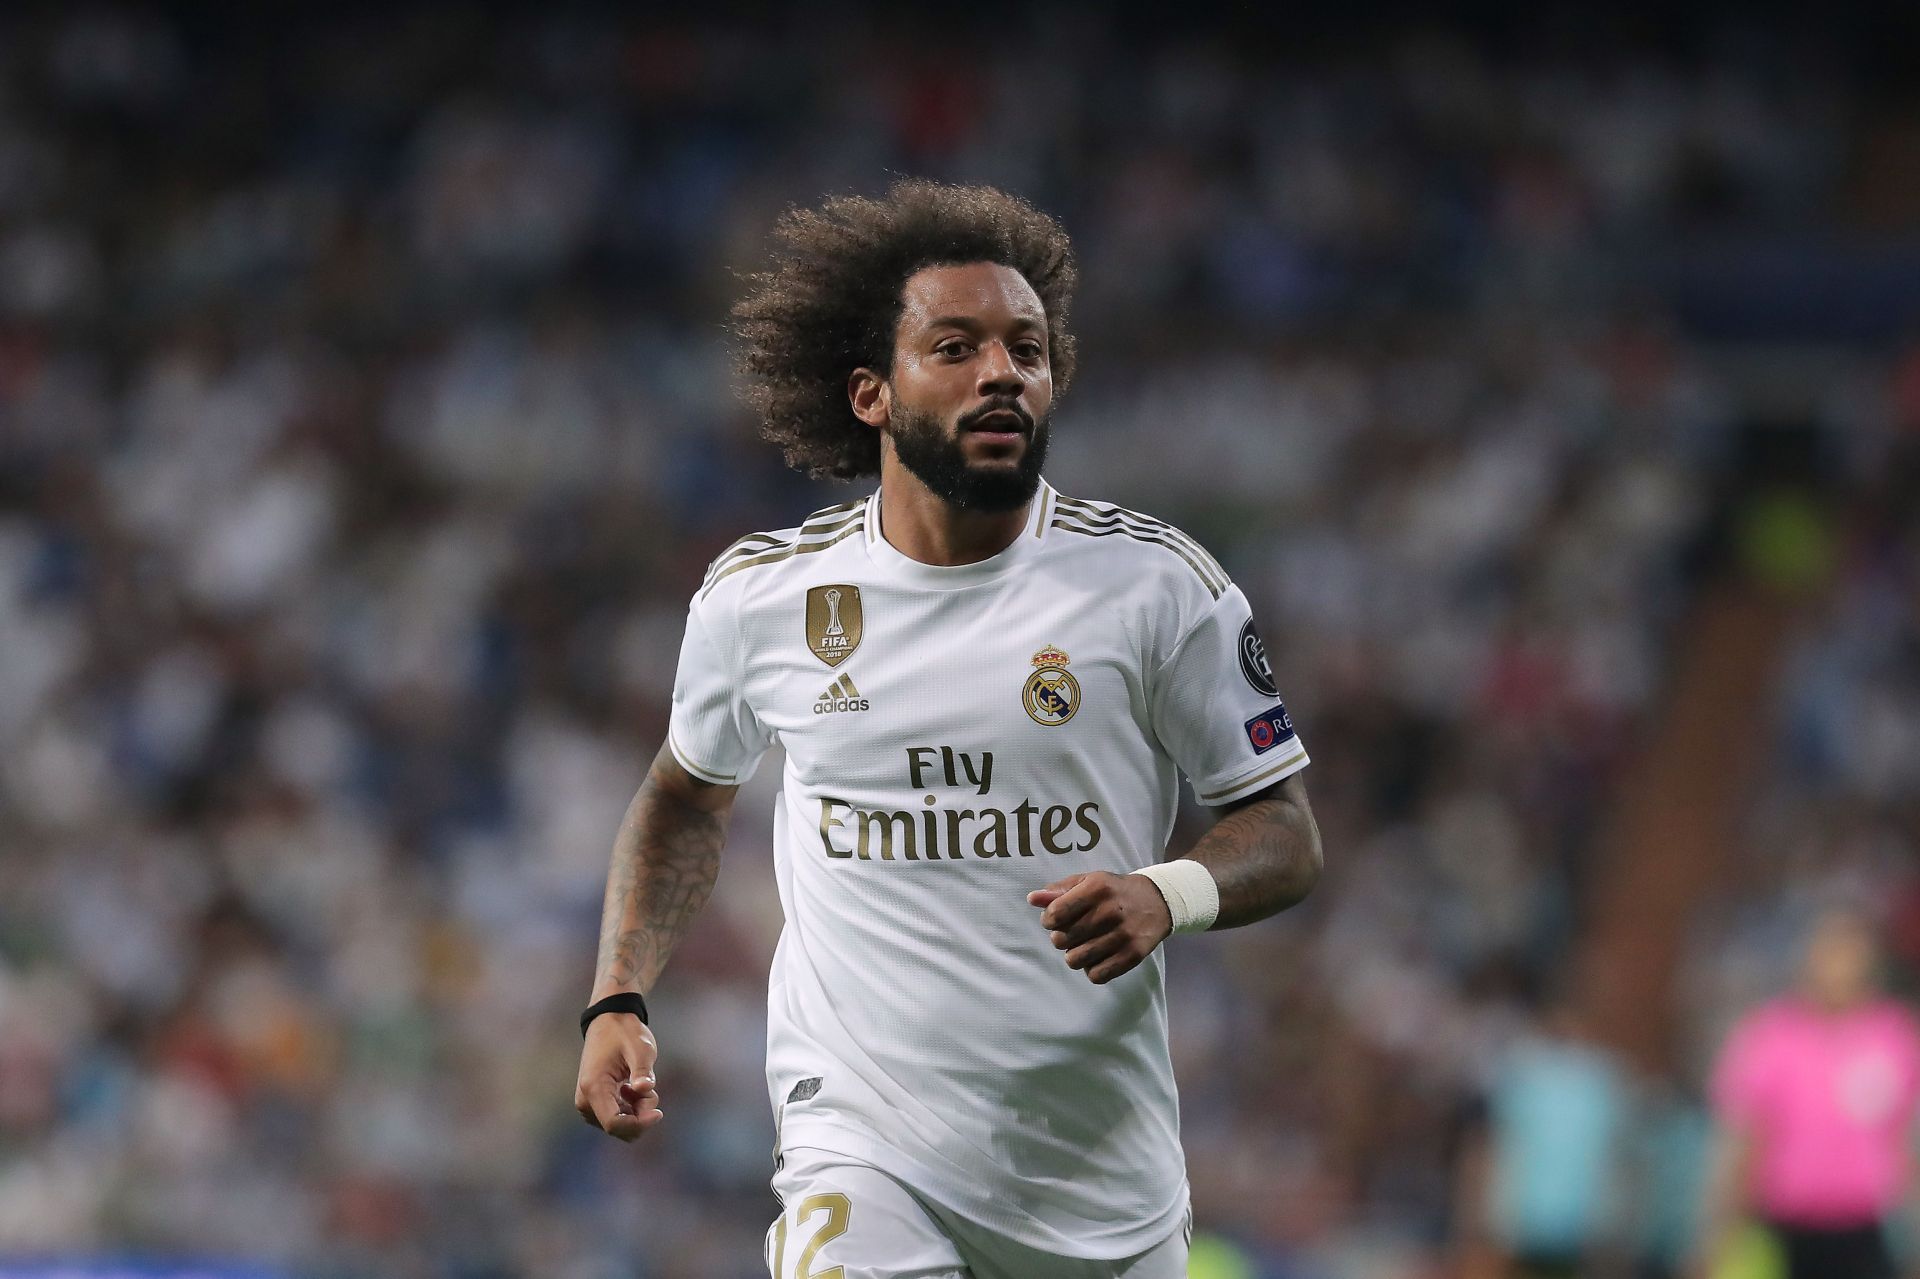 Marcelo is considered to be one of the best left-backs in football history